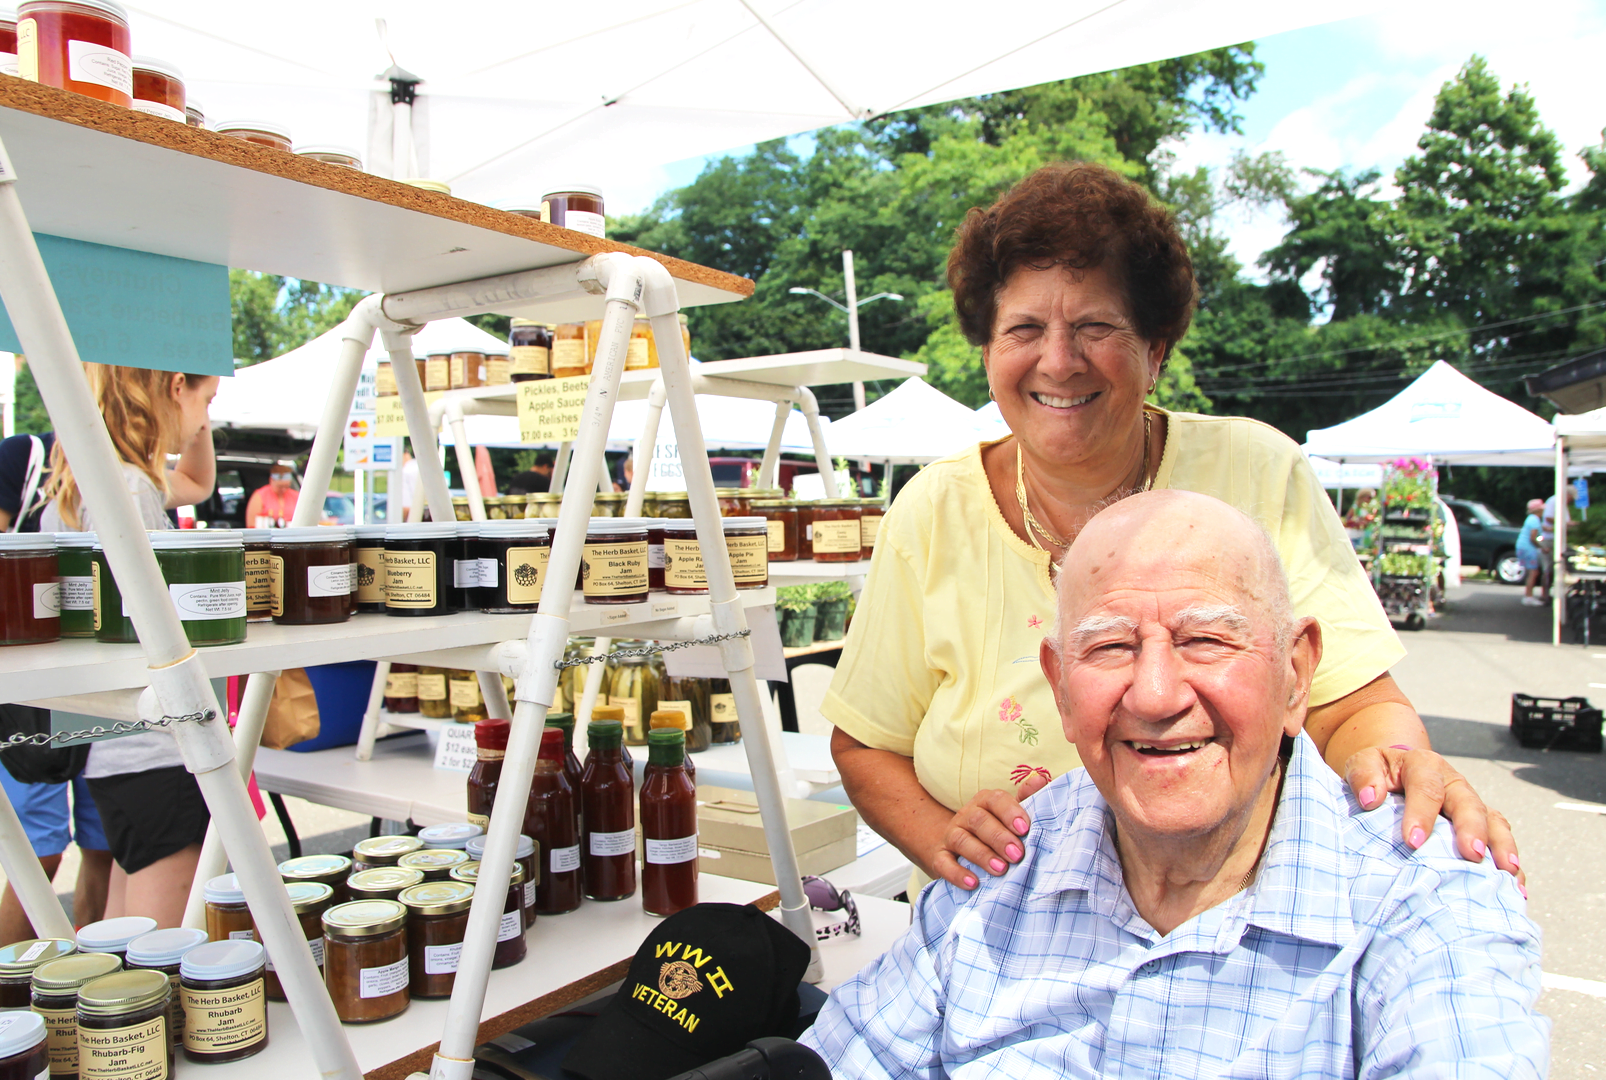 Jerry Siccardi and his daughter Judy Waldeyer at the Greenwich Farmers Market. July 2019 Photo: Leslie Yager